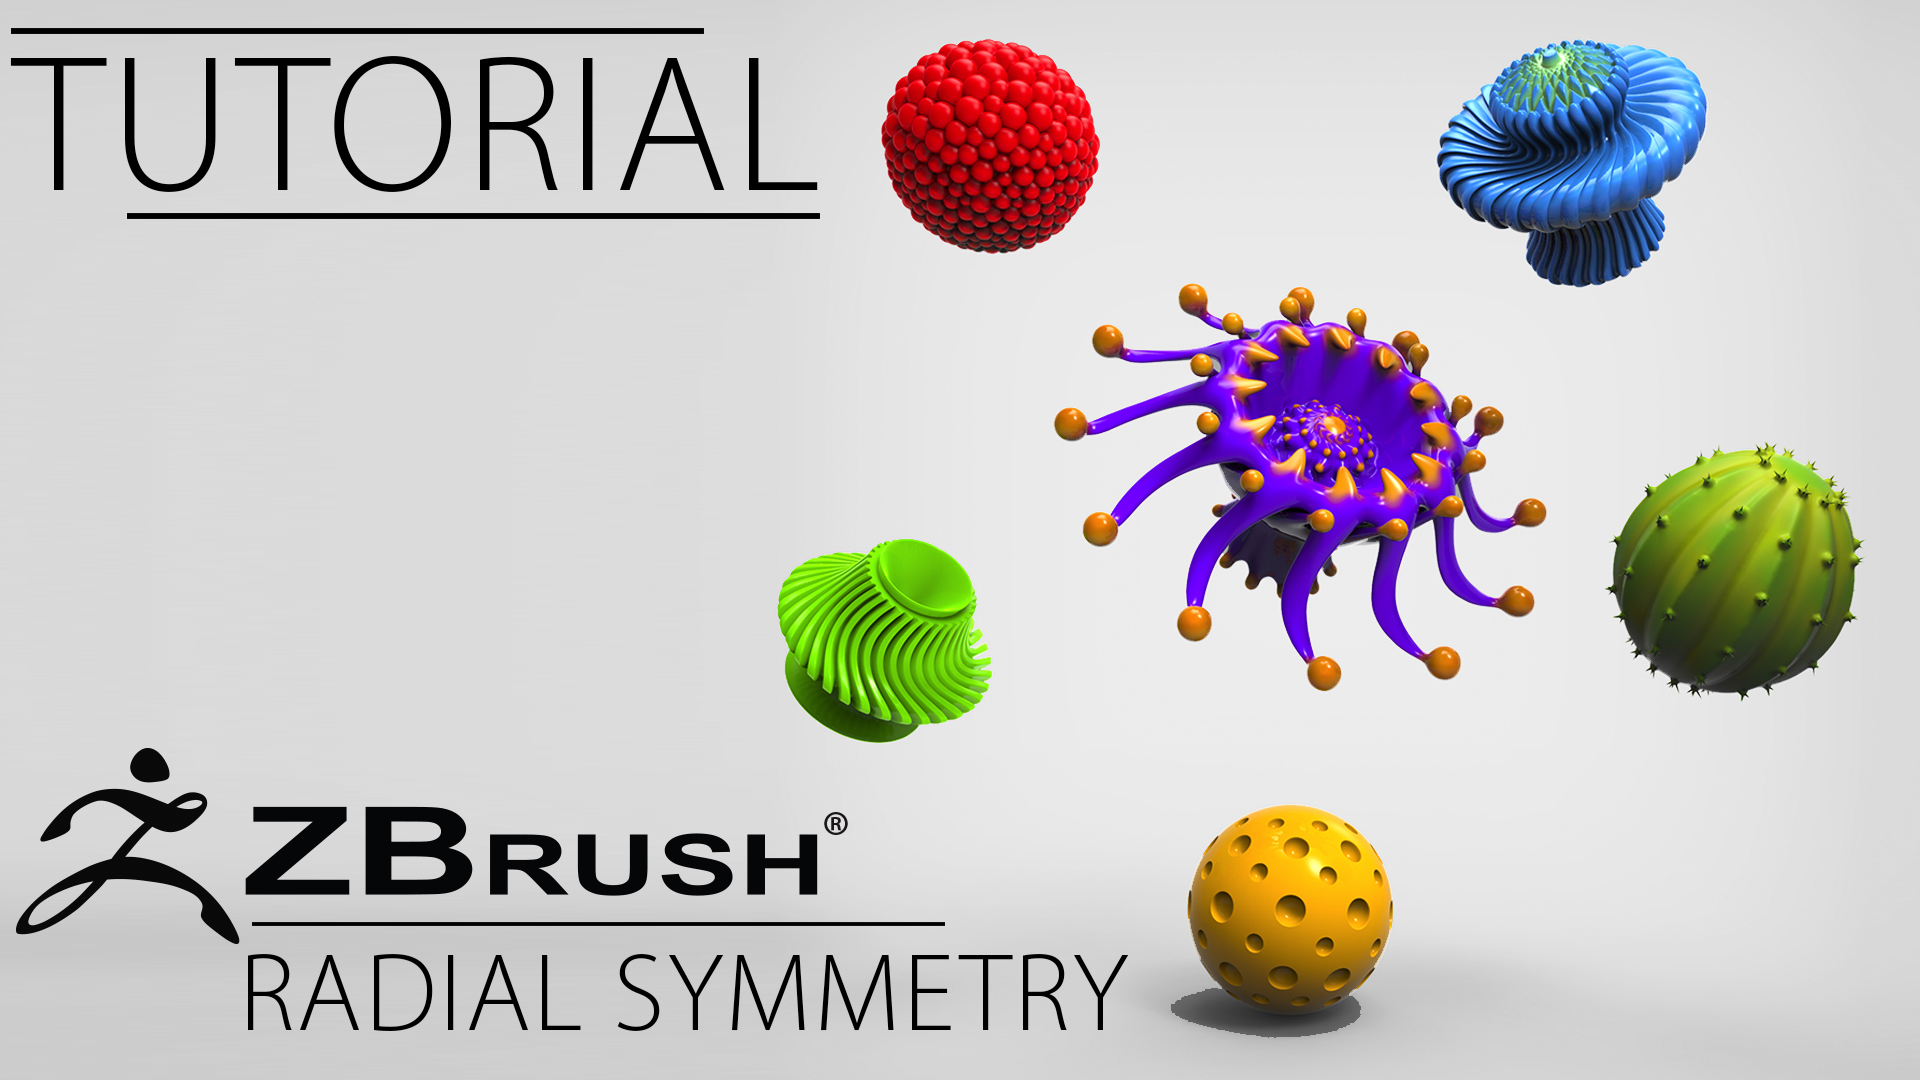 radial symettry slow your computer zbrush